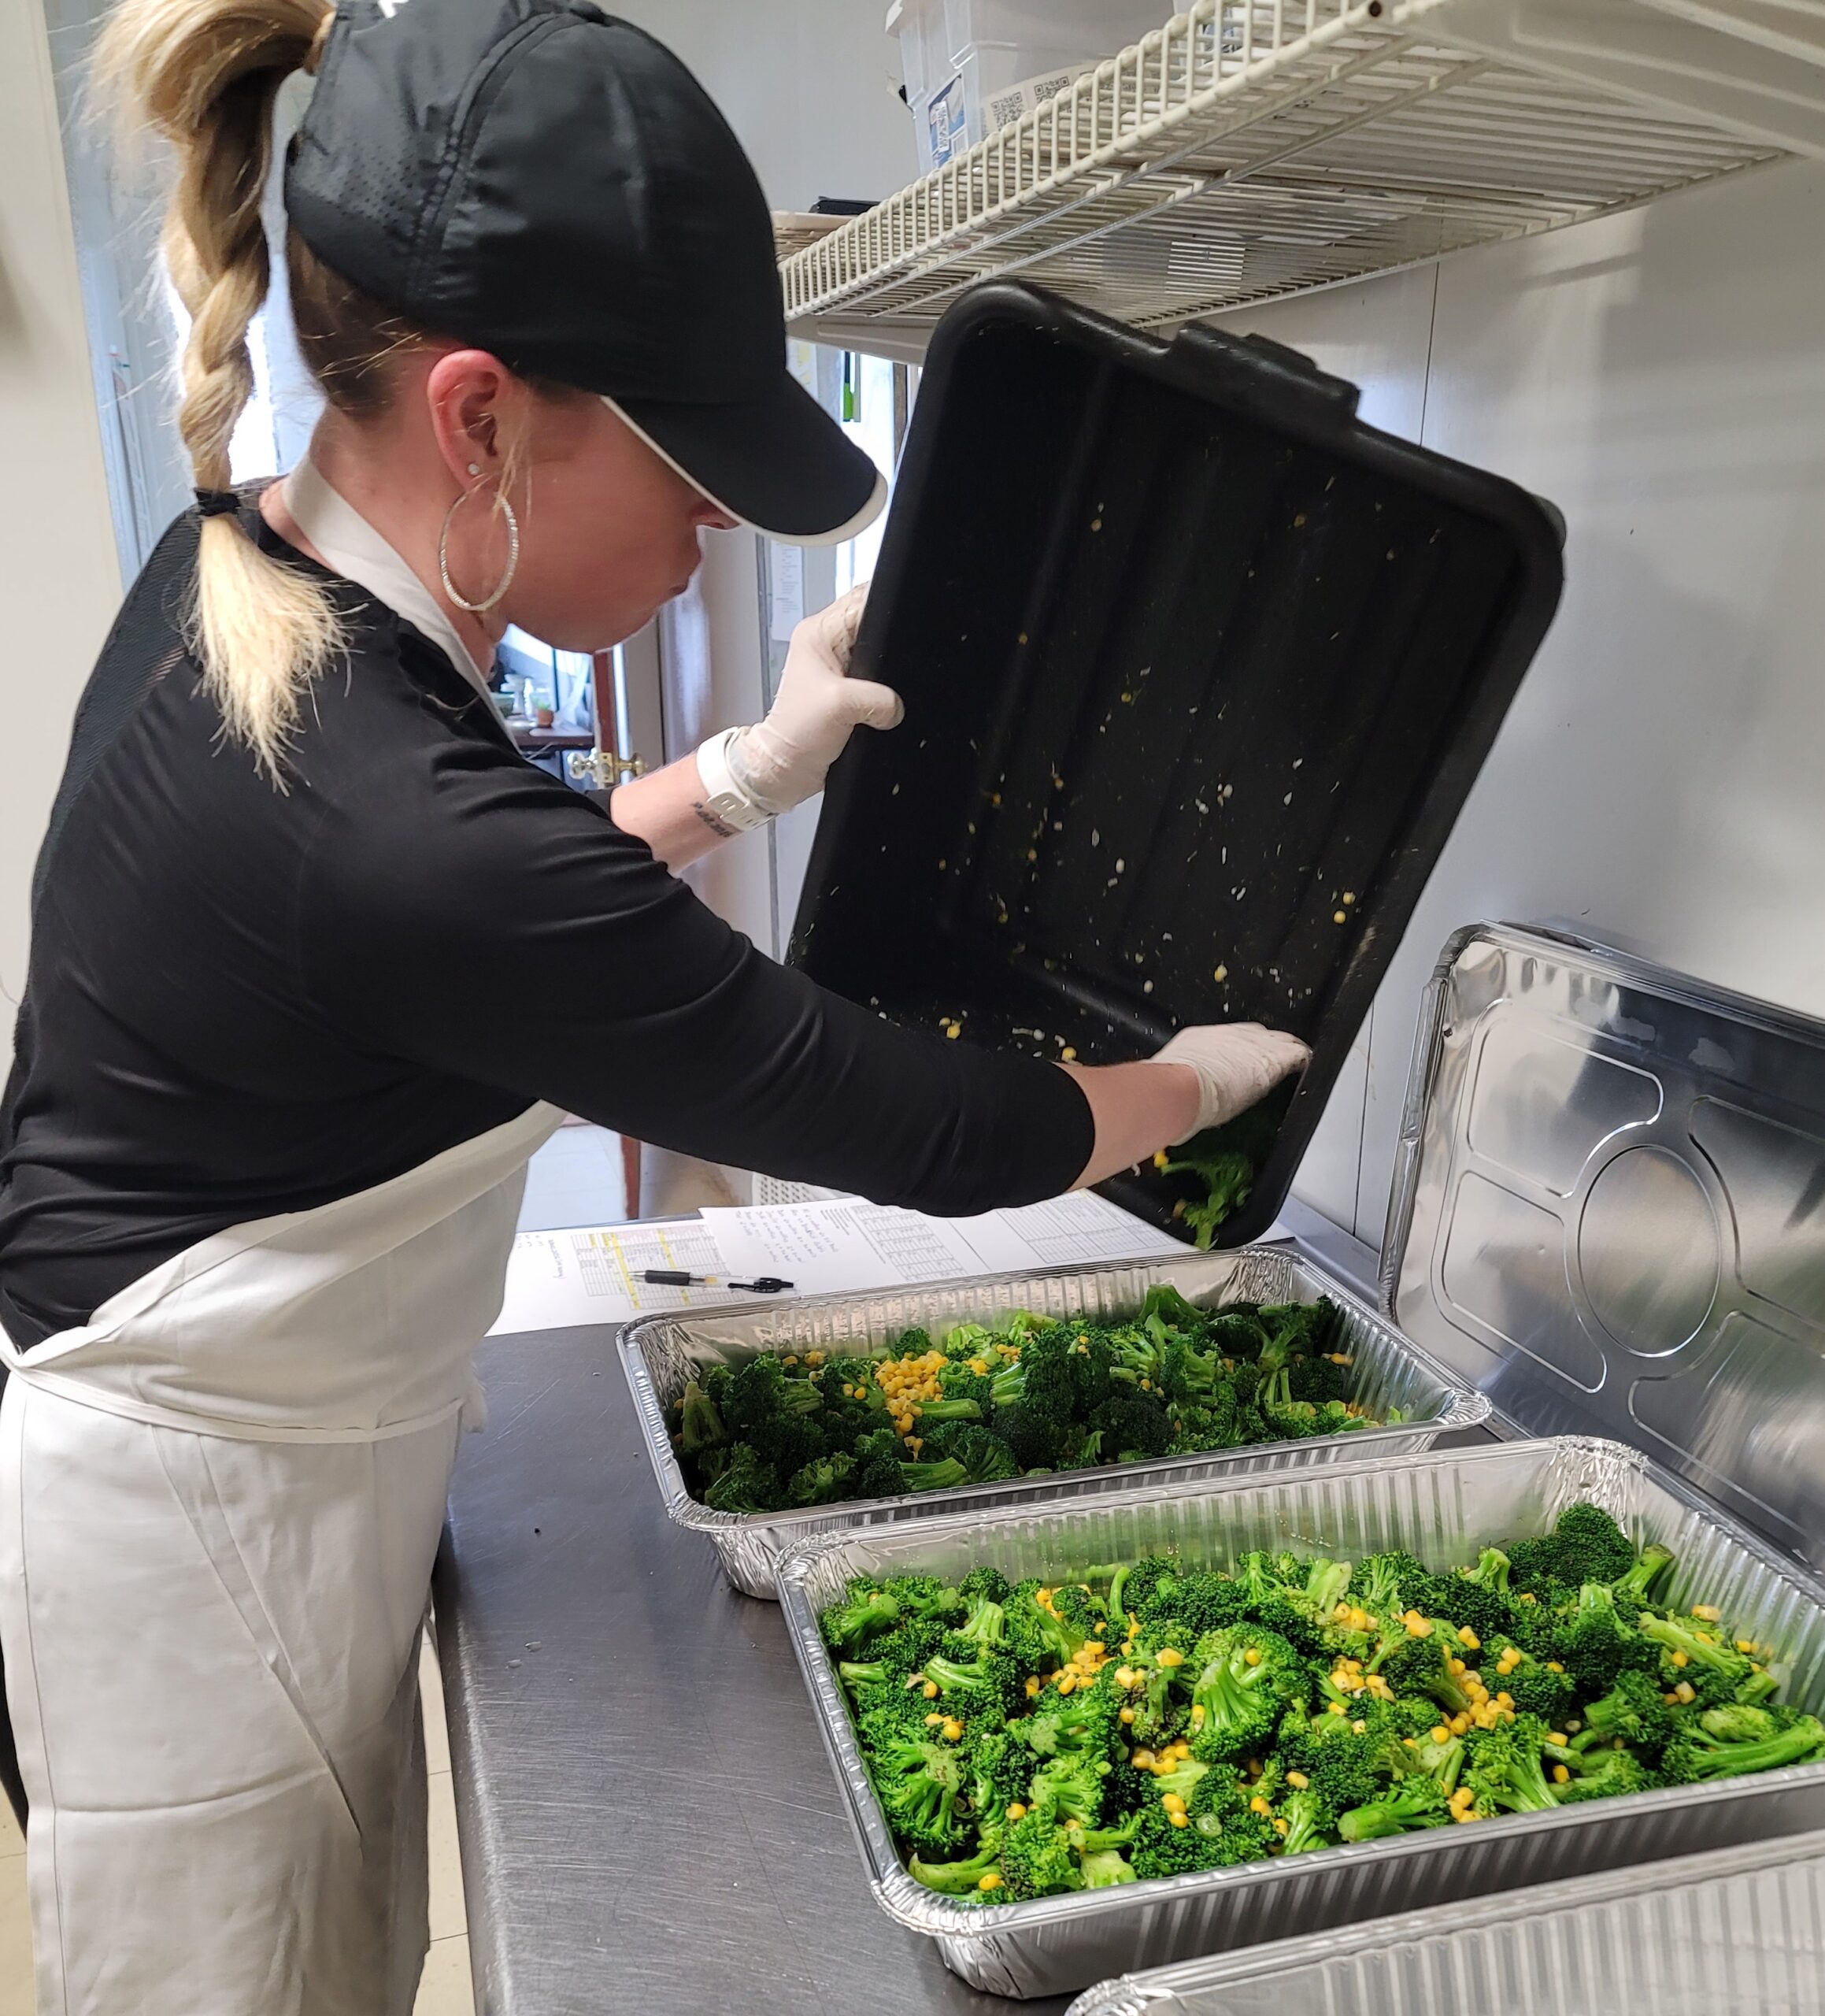 General Manager Tina King prepares meals at the Livonia headquarters